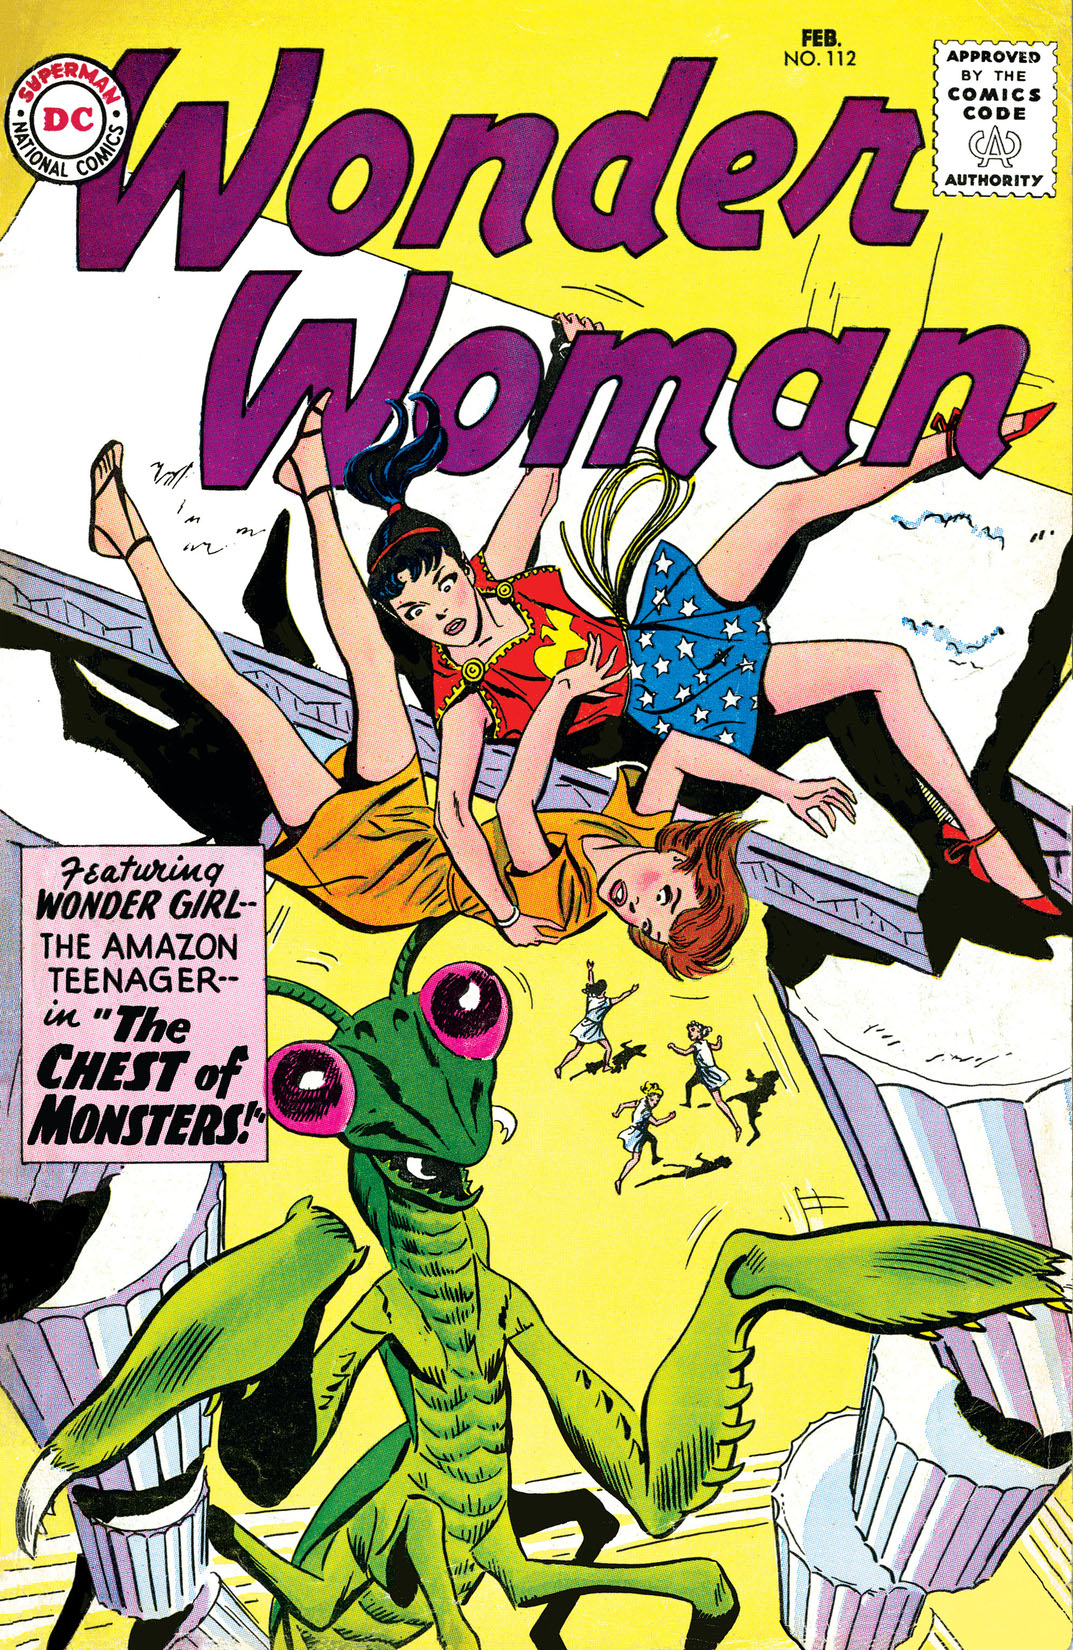 Wonder Woman (1942-) #112 preview images